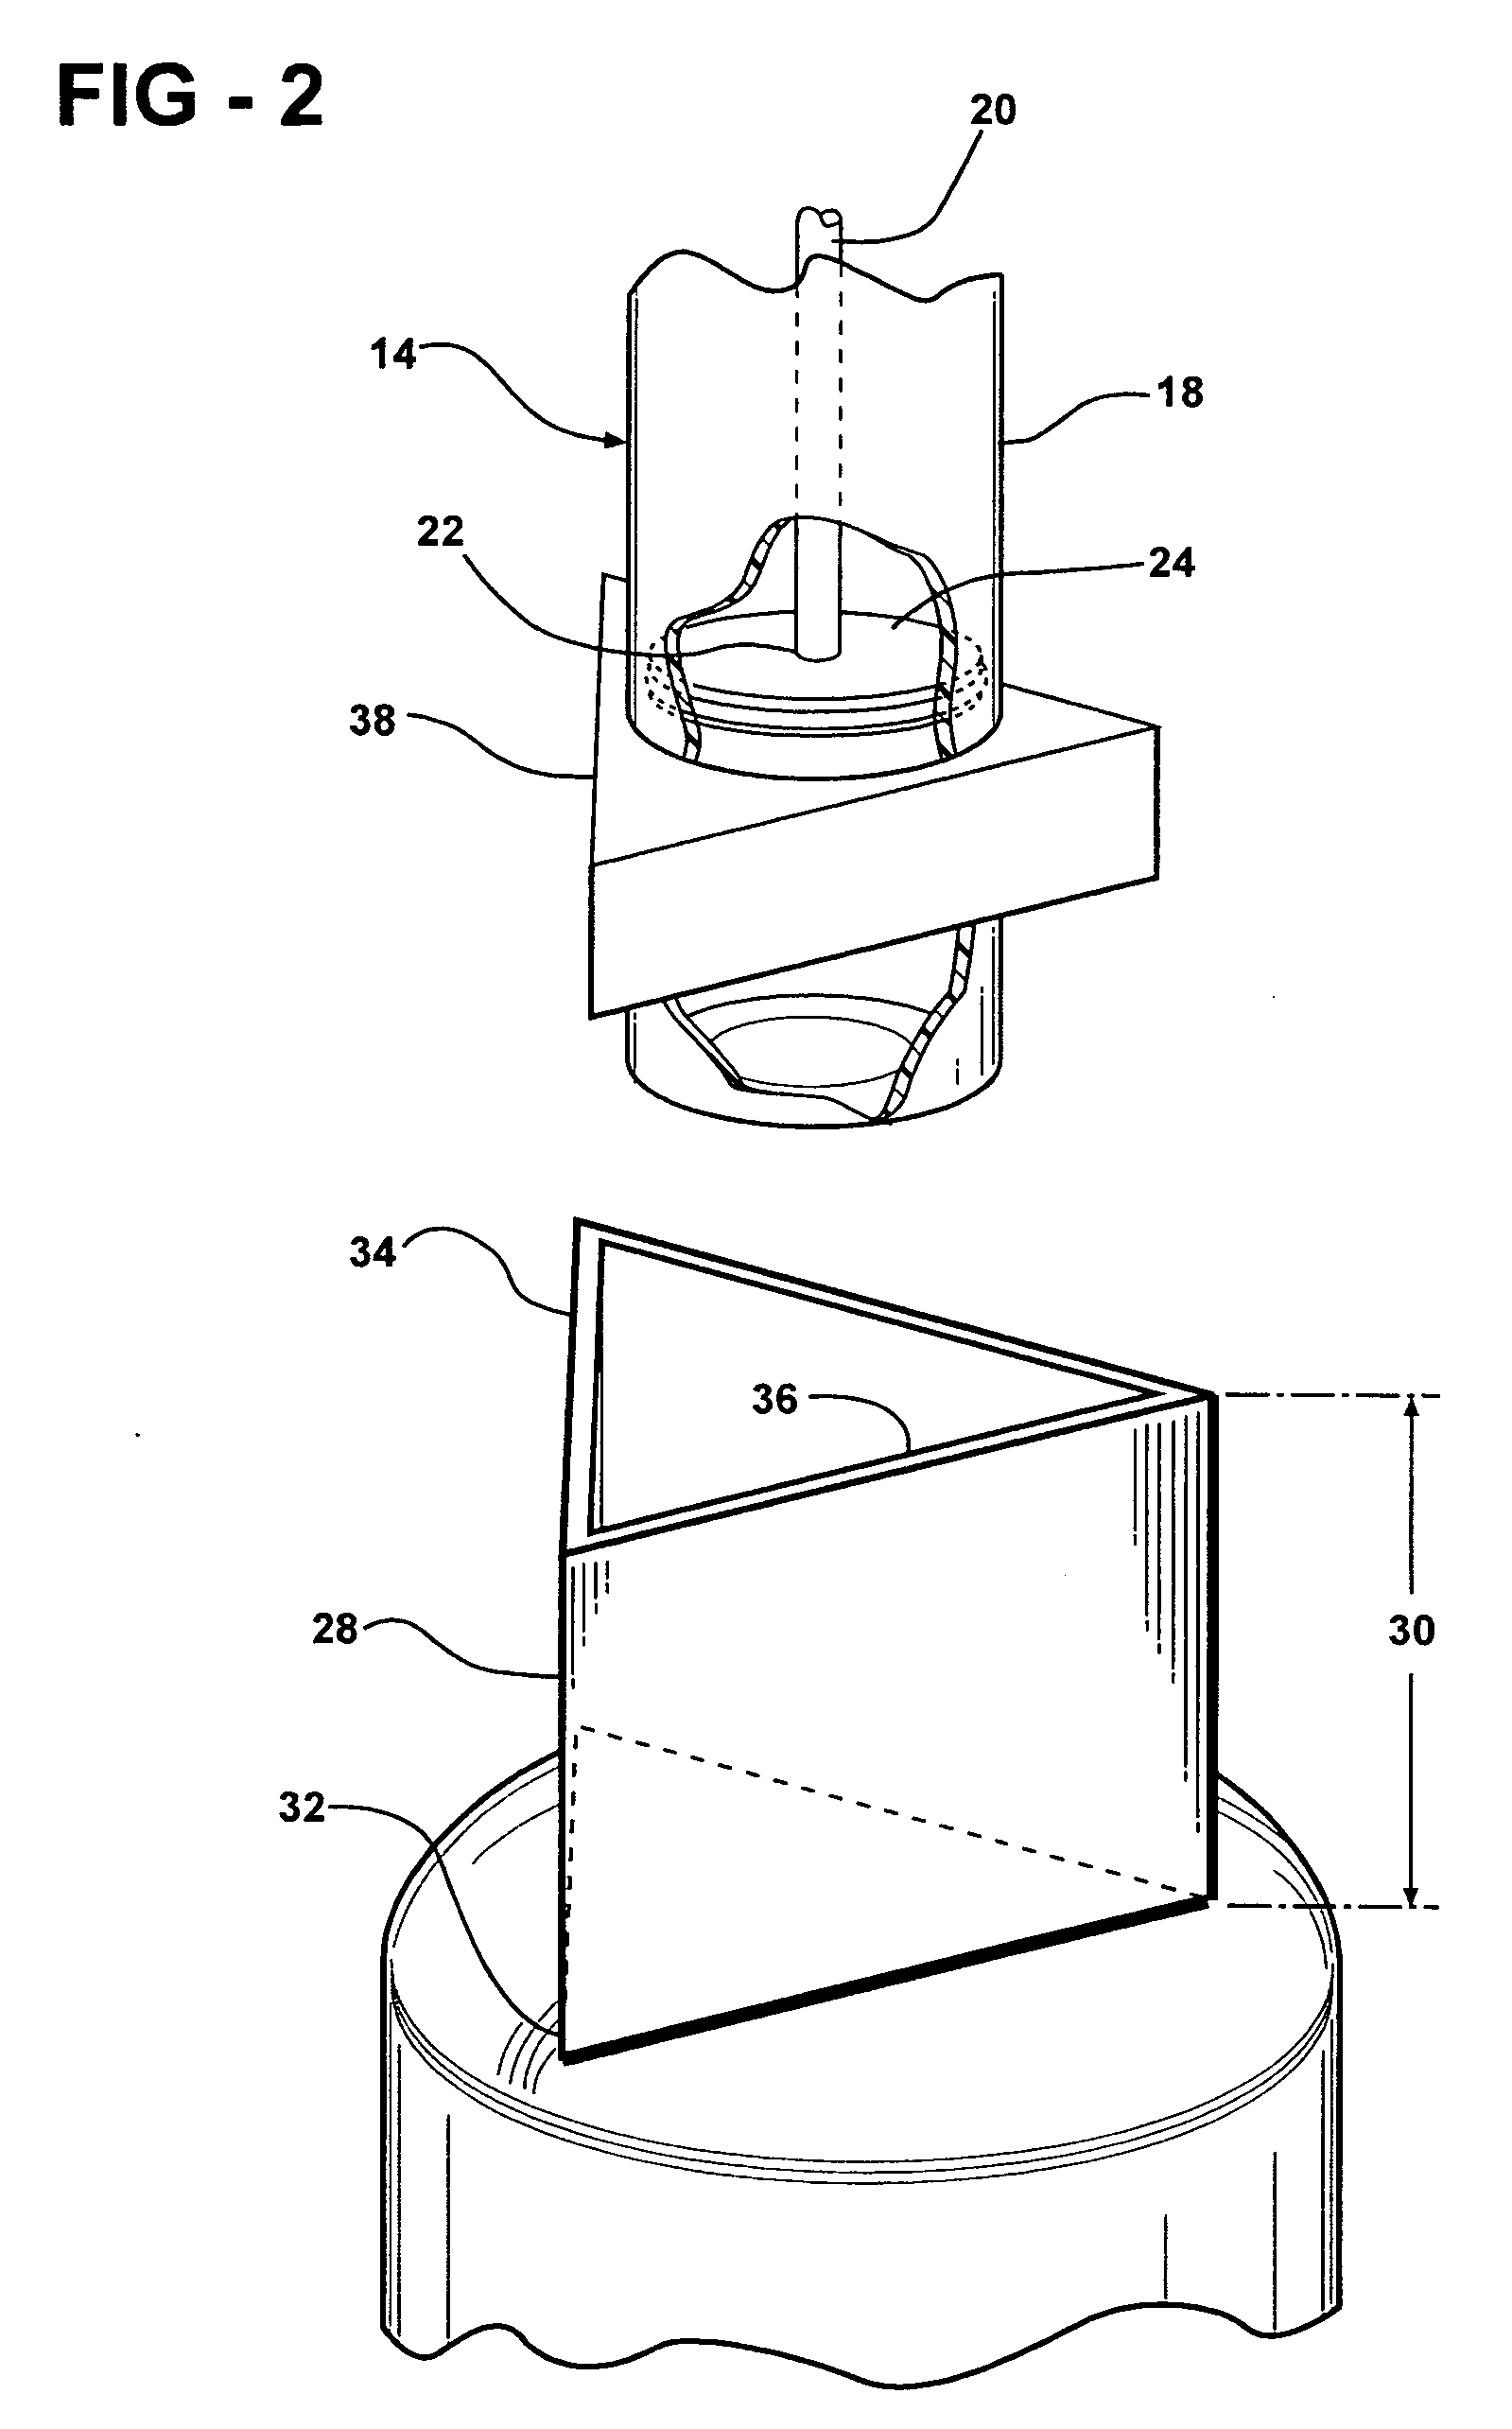 Needle-less fluid delivery assembly and error prevention system